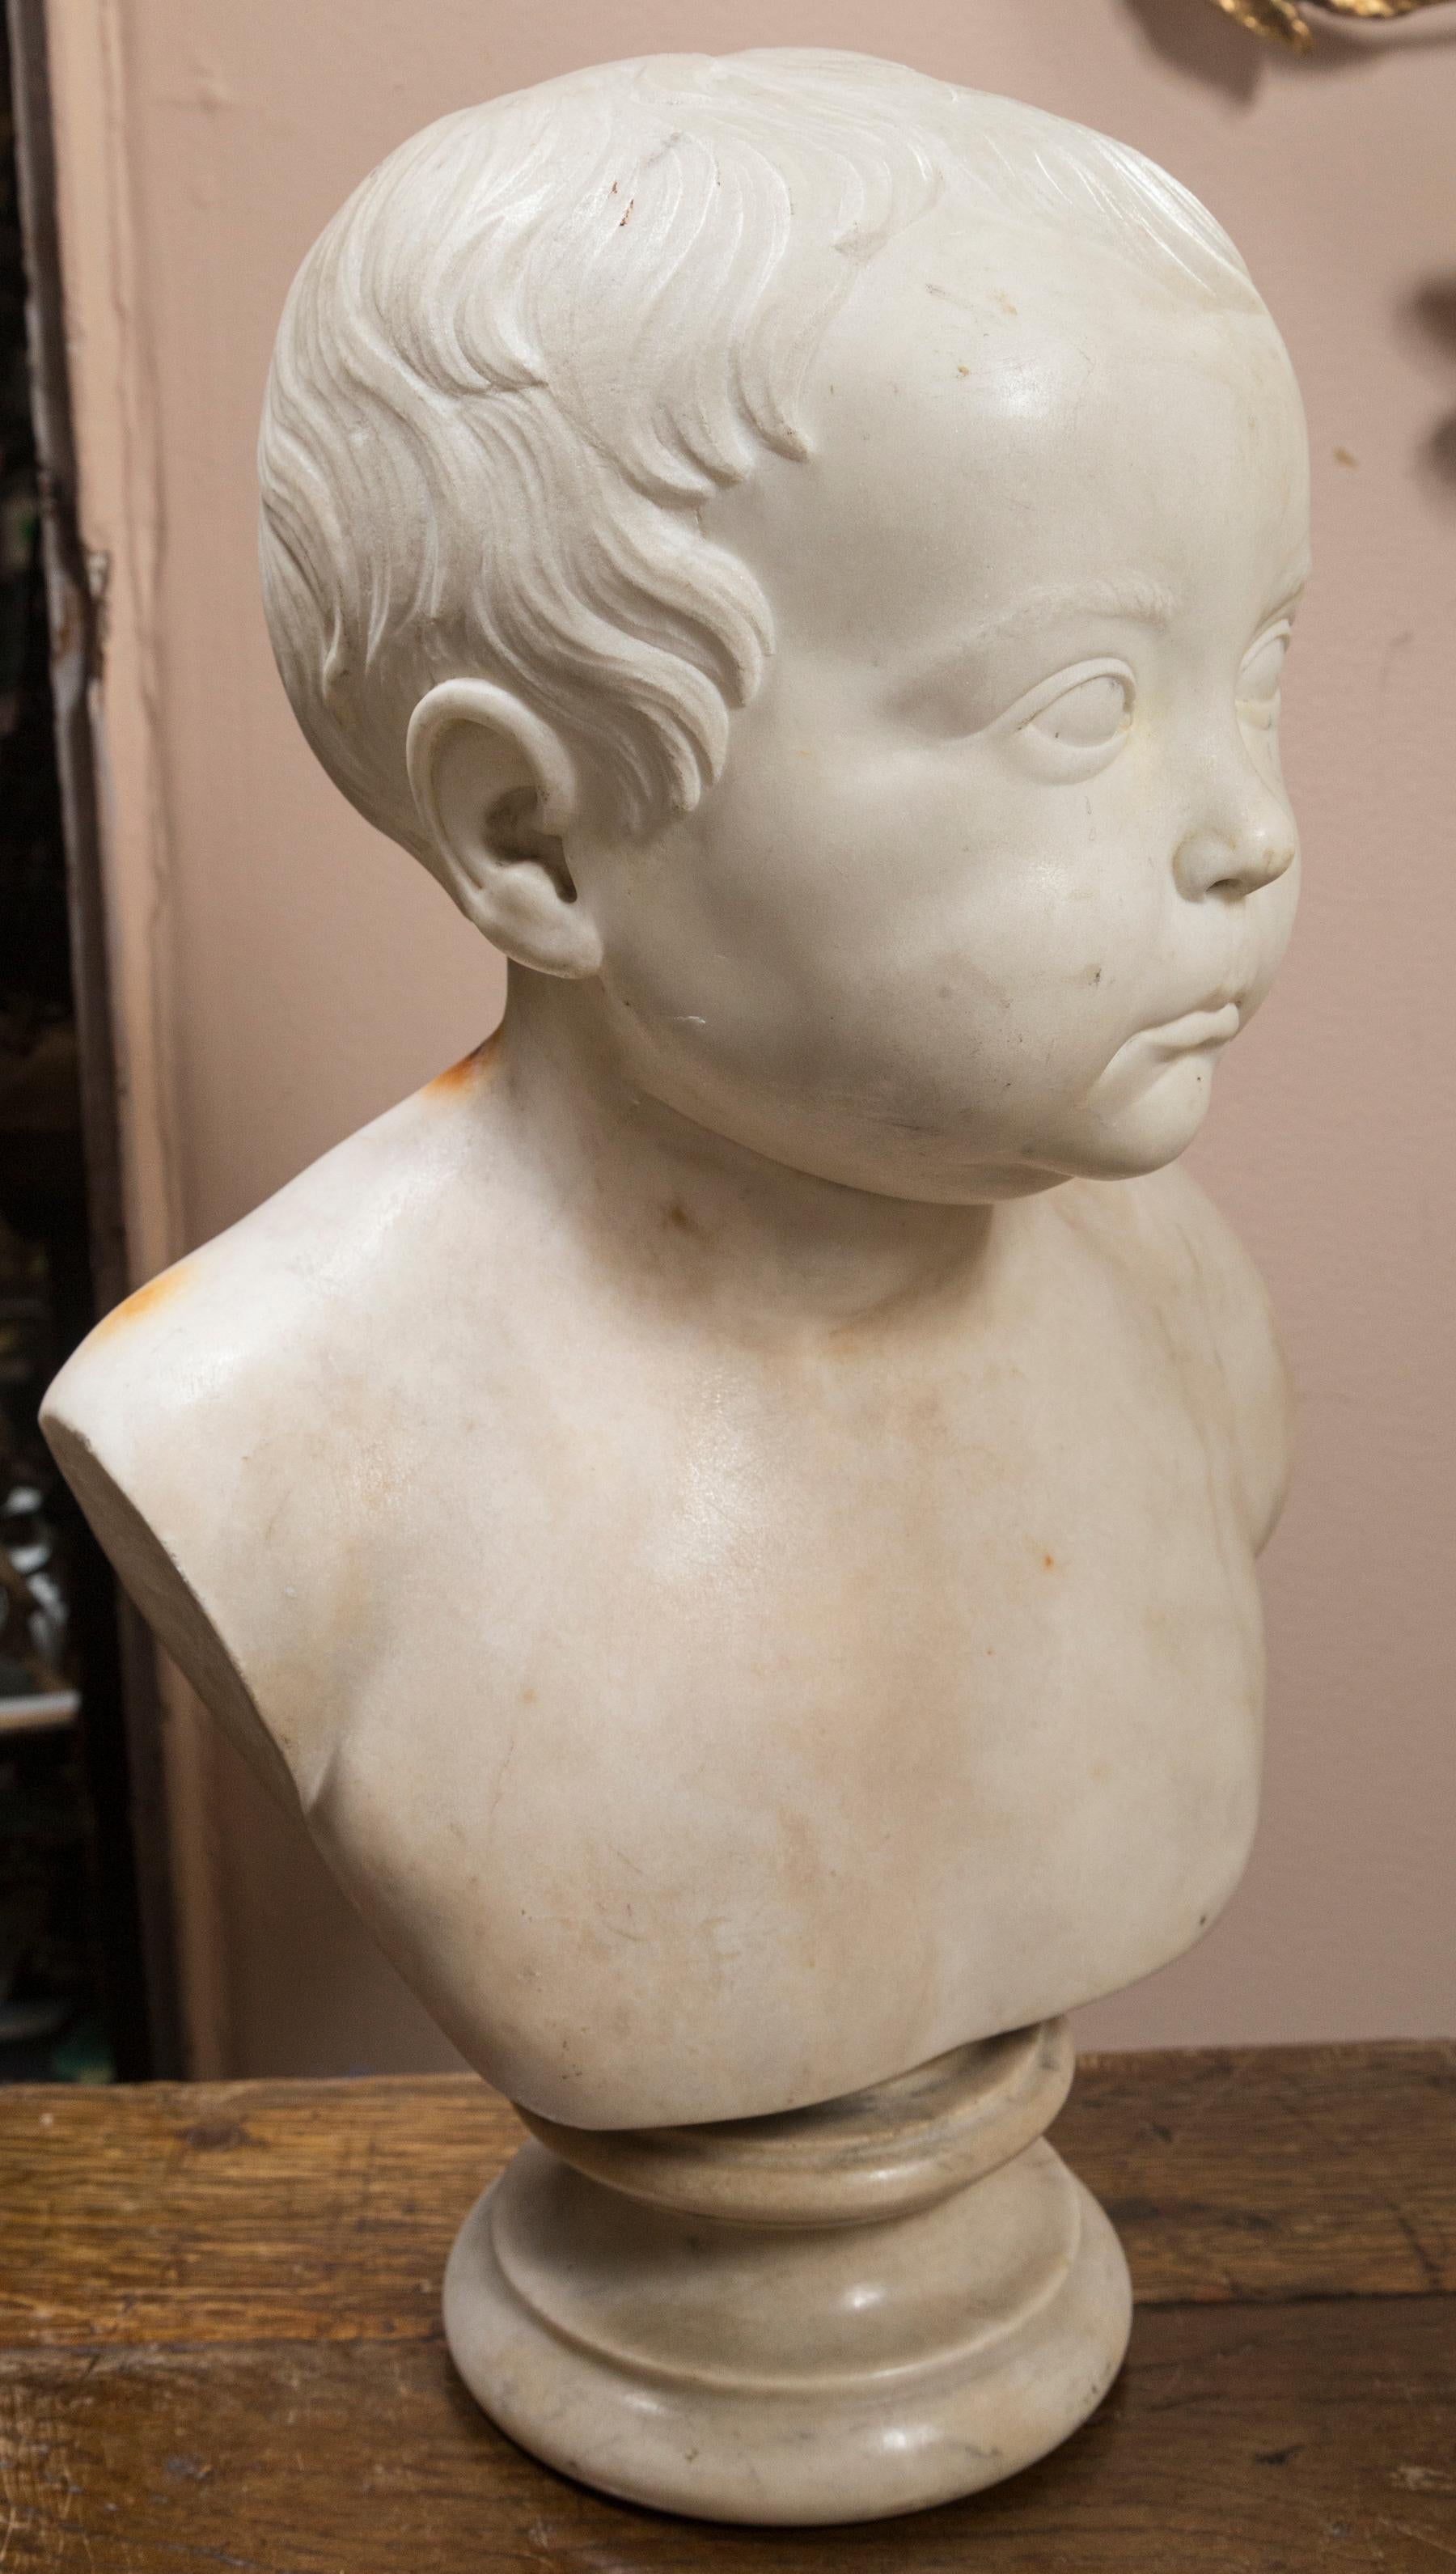 Cherubic face, signed on the back with the following inscription BUST OF R HETHERINGTON
 AGE 11 MONTHS
 W. SPENCE, FECIT 
 L POOL 1837
The round socle measures 4.75 in diameter.